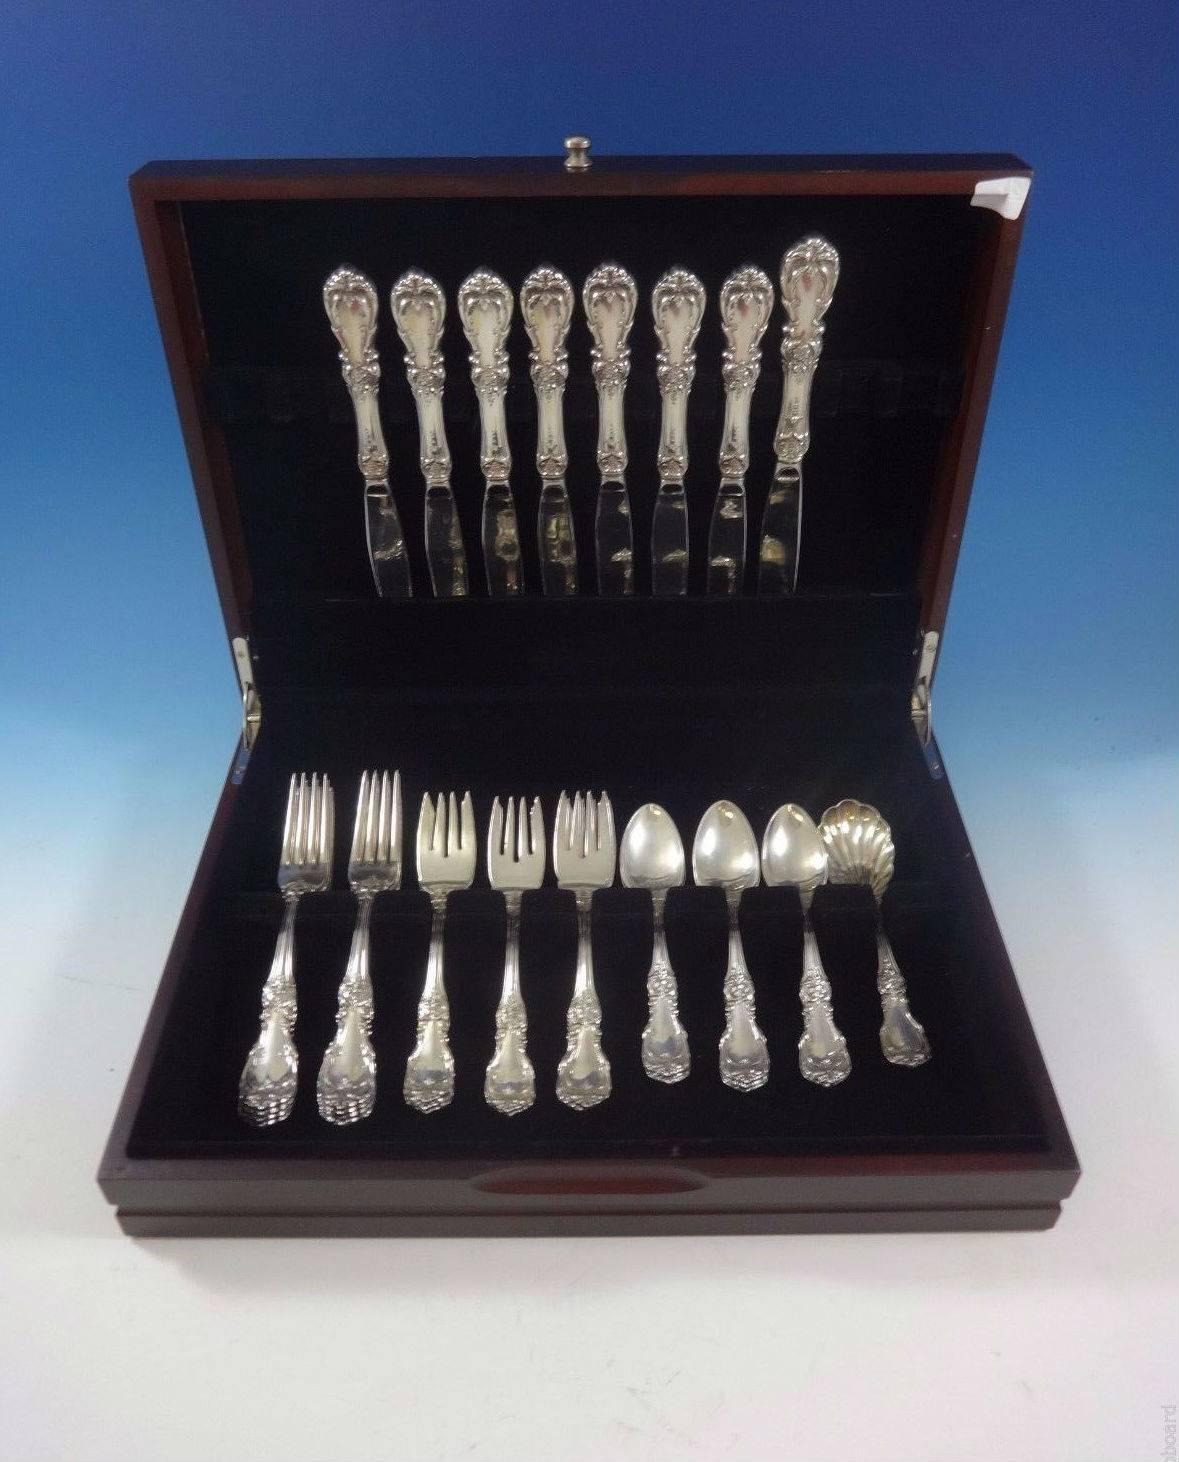 This set includes:

Eight knives, 8 7/8